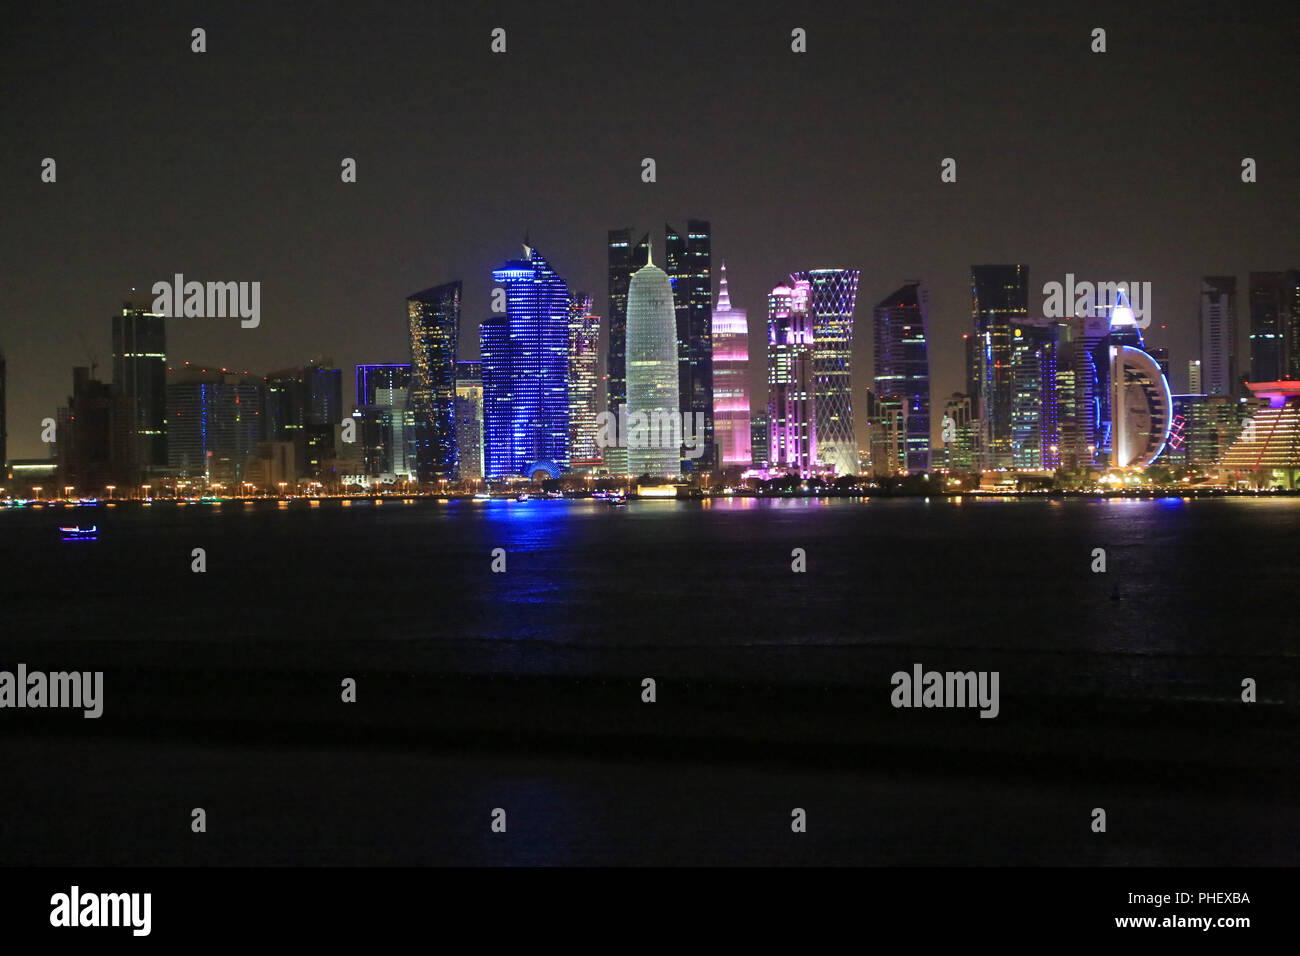 Qatar, Doha, capitale skyline at night Banque D'Images